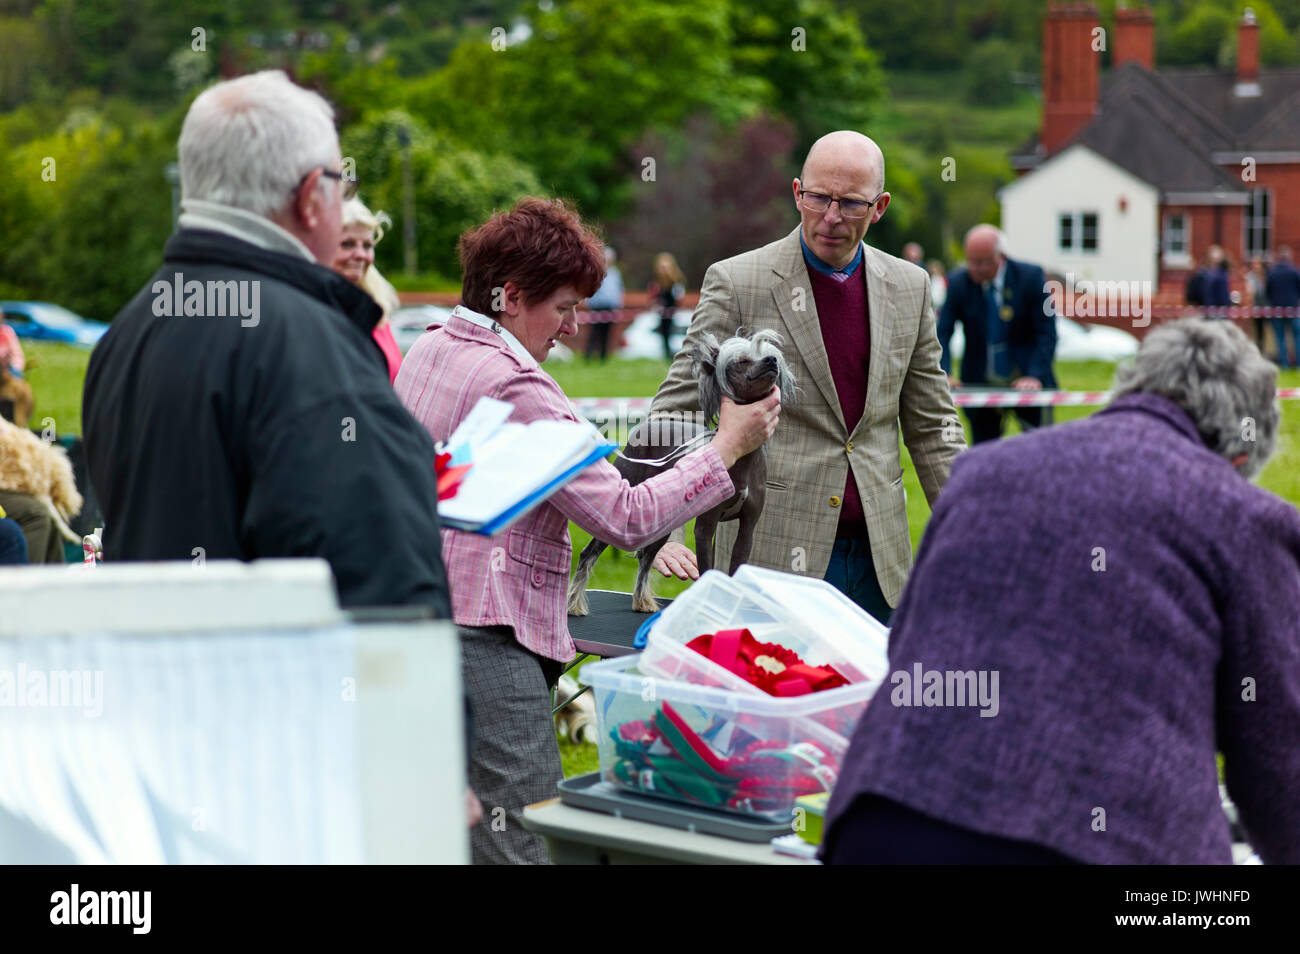 Dogs being judged at dogshow in Llangollen, Wales Stock Photo